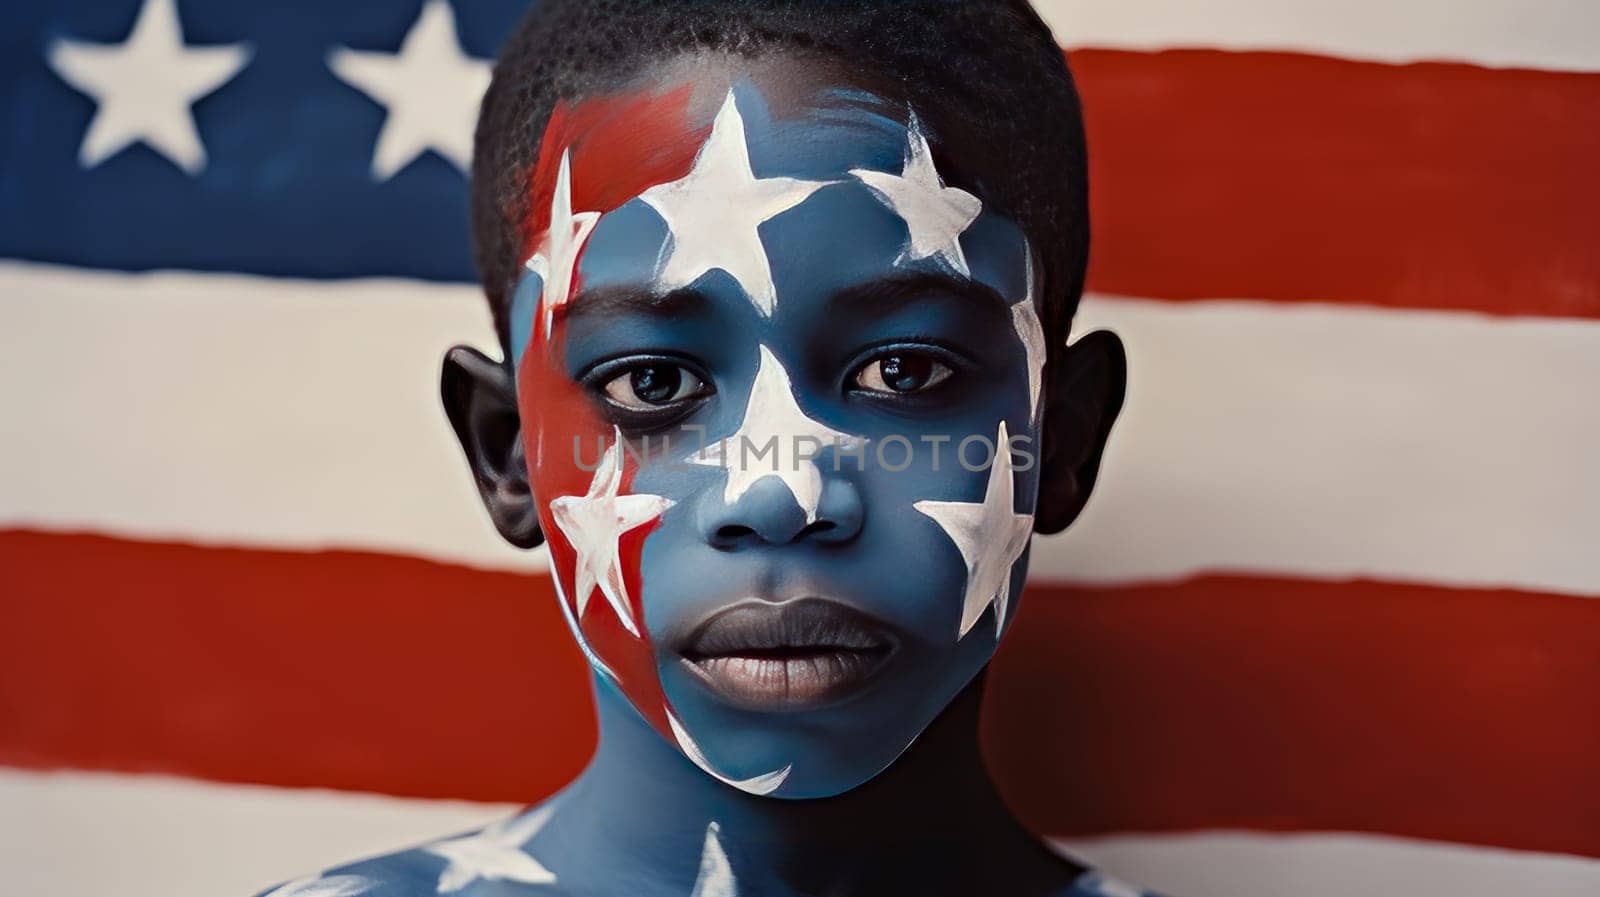 Afro is a dark-skinned, serious, responsible boy with his face painted in color of flag of United States of America. American President's Day, USA Independence Day, American flag colors background 4 July, February holiday, stars and stripes, red blue